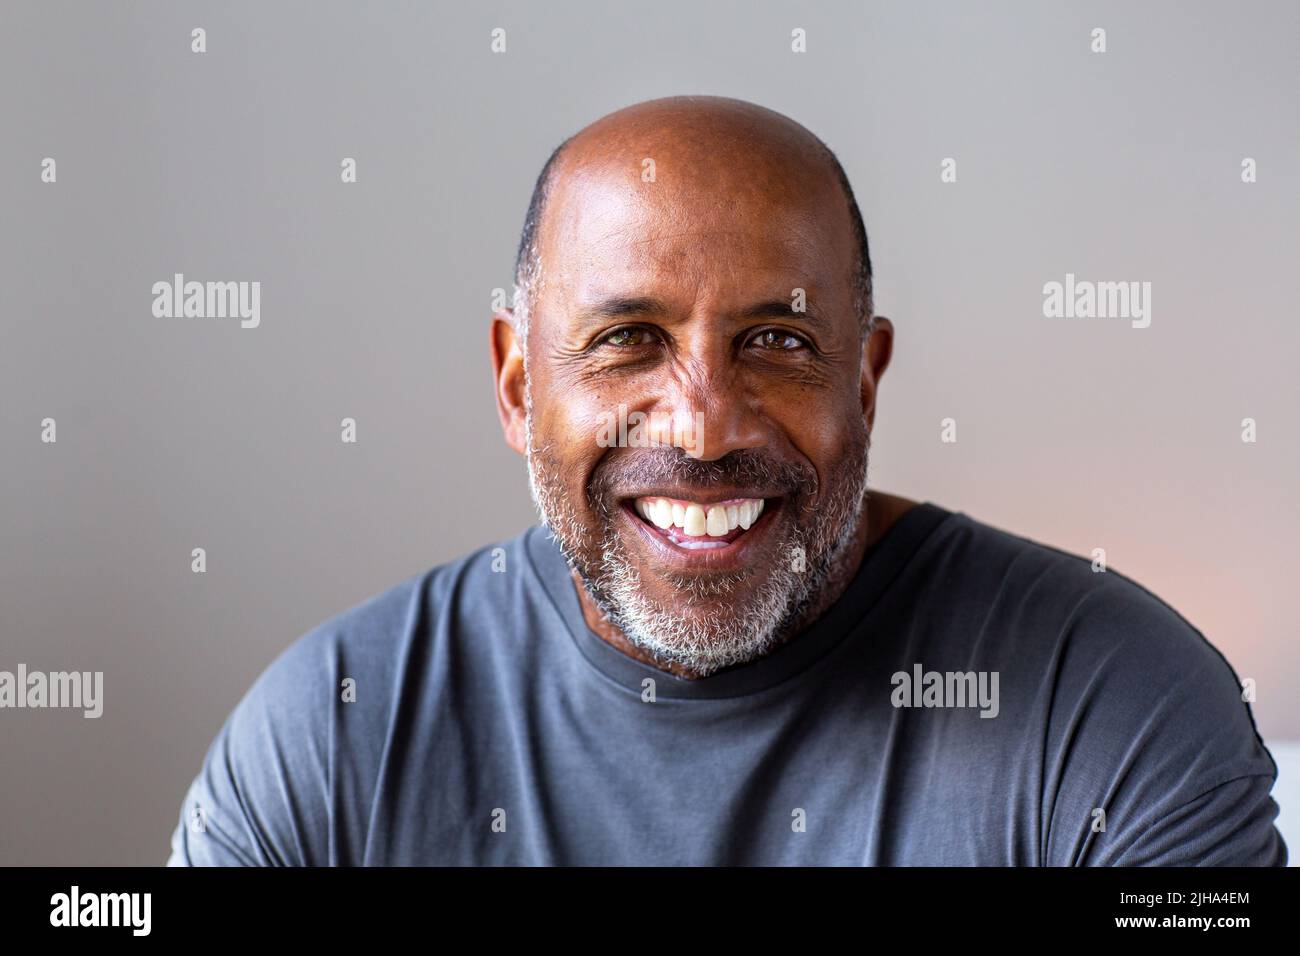 Portrait of a mature man smiling looking the camera. Stock Photo